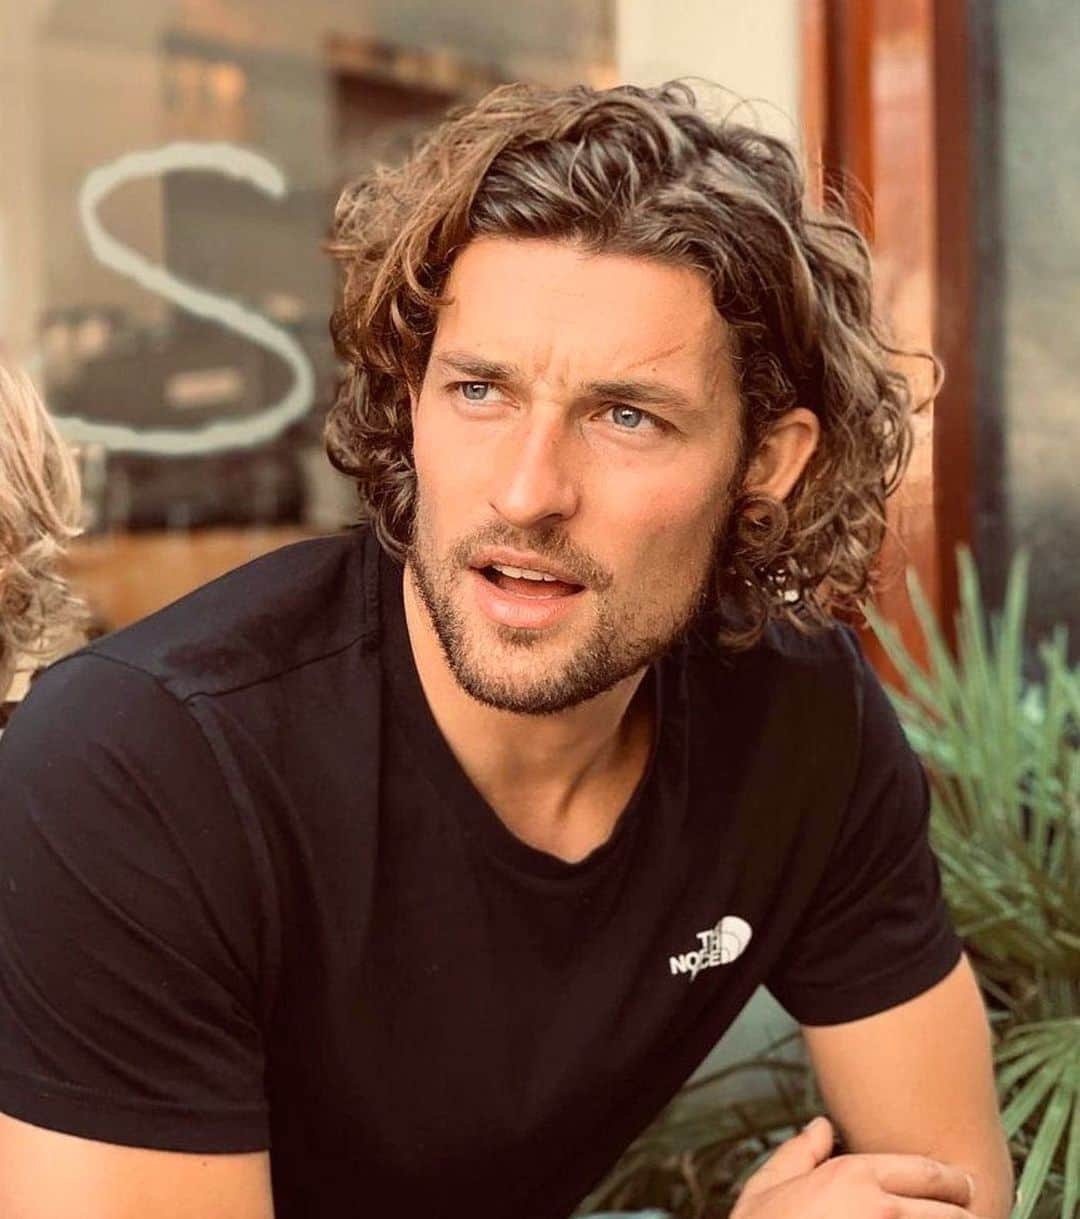 STYLE4GUYSのインスタグラム：「Tag someone who would look good with this hairstyle! Be sure Follow & Tag us on your photos @Style4Guys / @MenStreetPost For your chance to be feature HERE!」